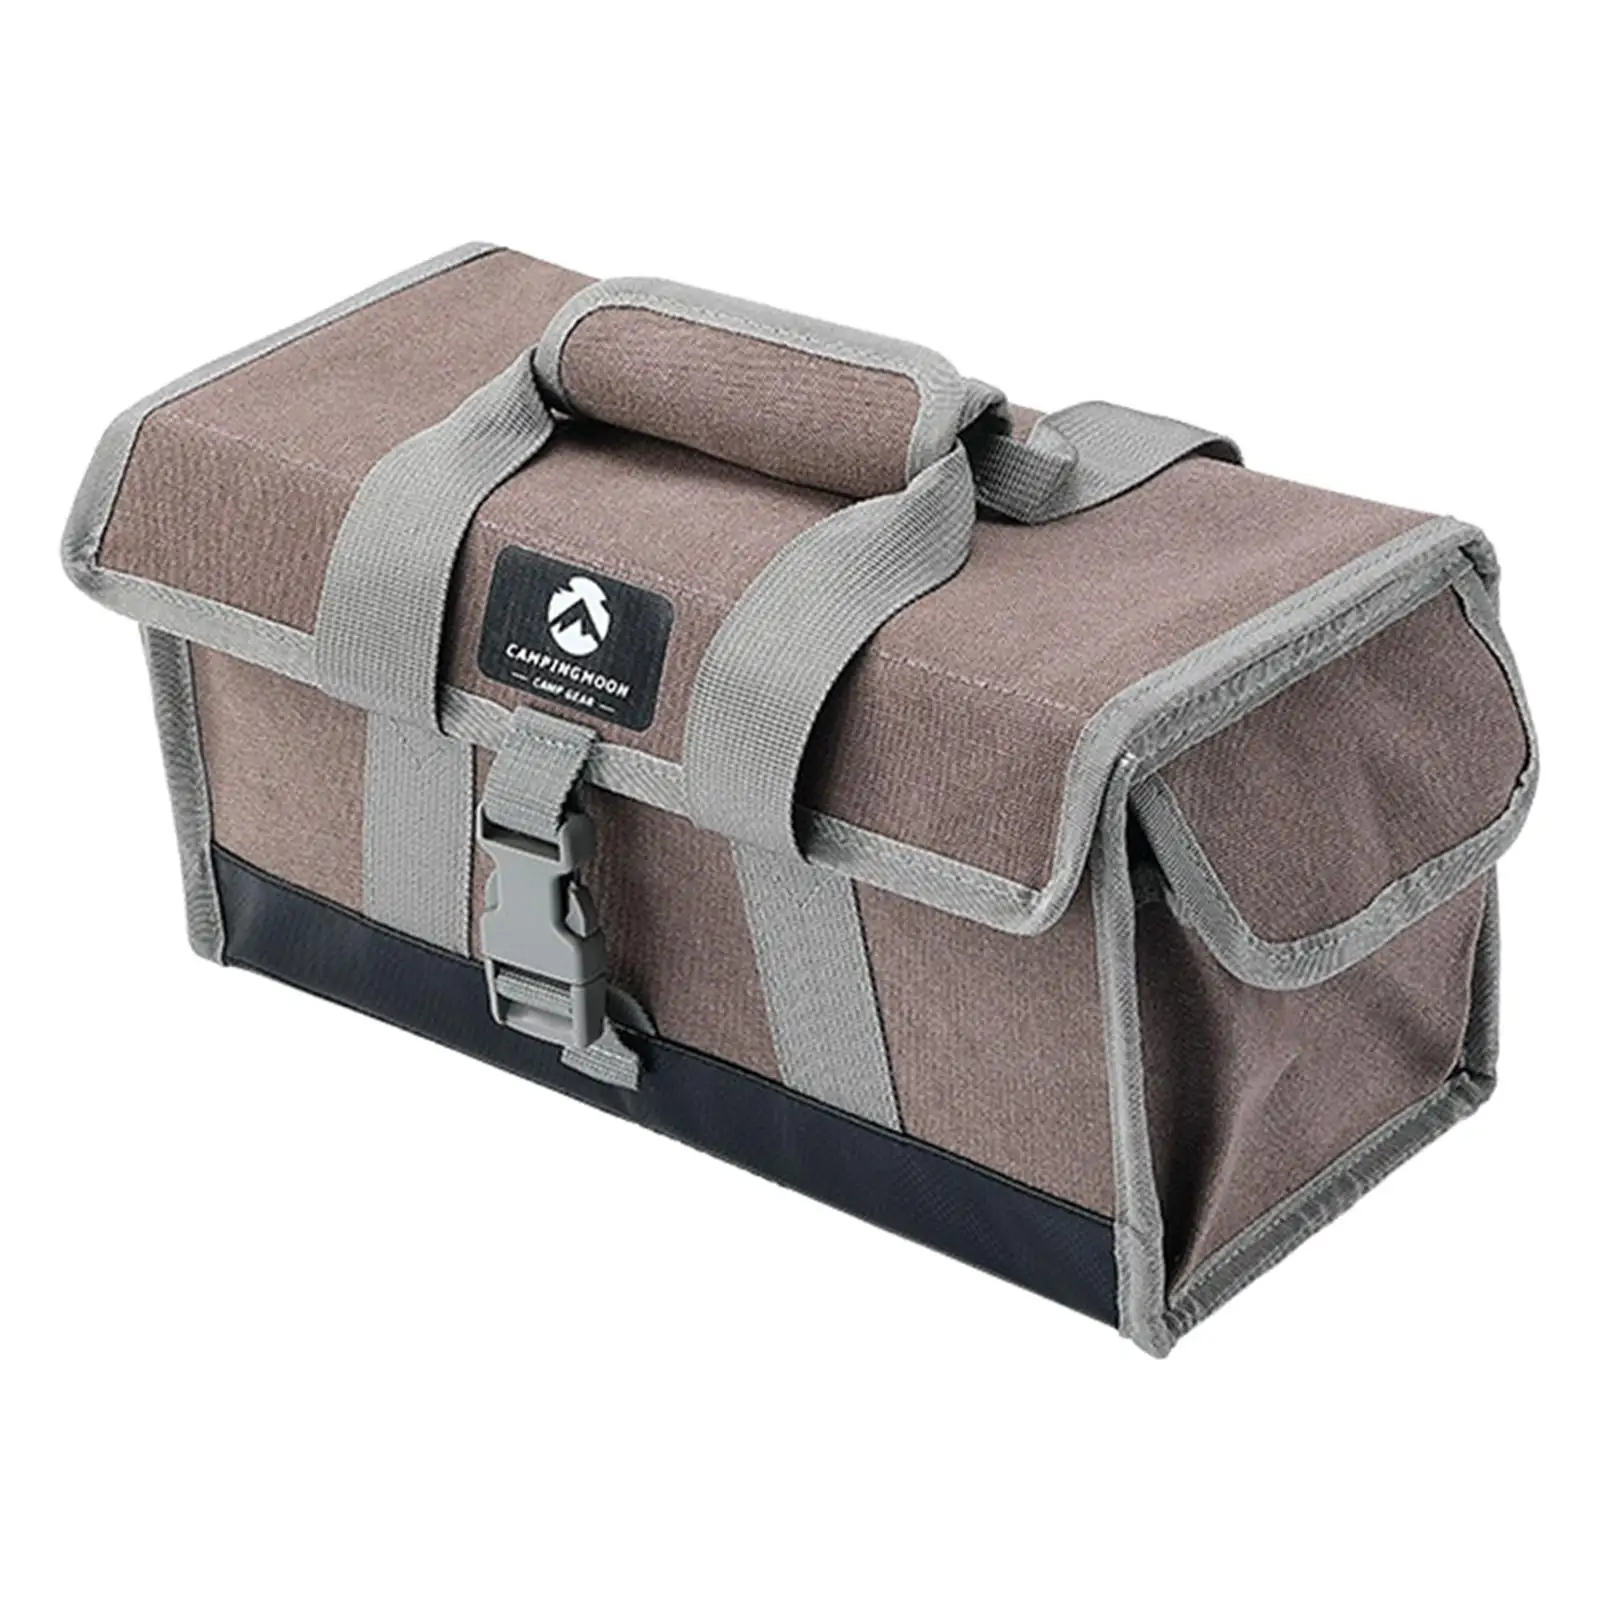 Foldable Camping Tool Bag Canvas Durable Large Capacity Storage Bag Handbag Pouch Container for BBQ Garden Outdoor Hiking Picnic